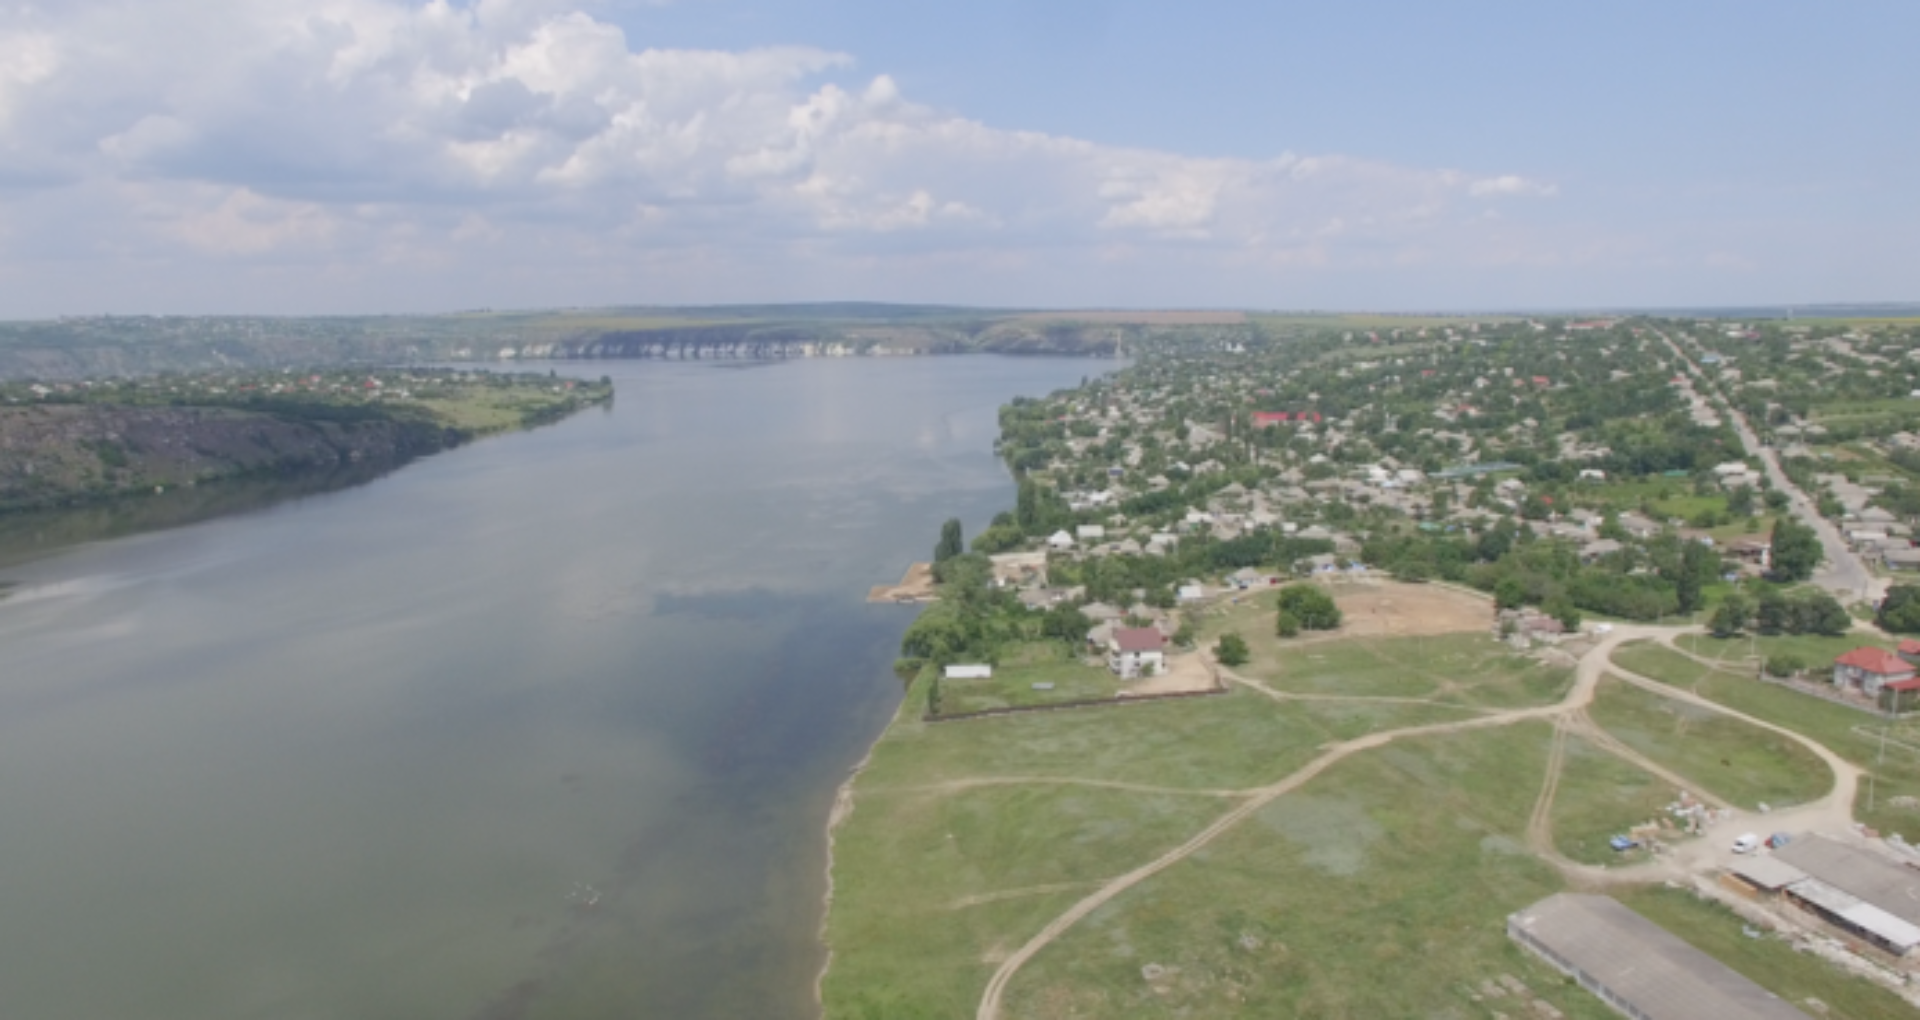 Unauthorized Construction on the Nistru River